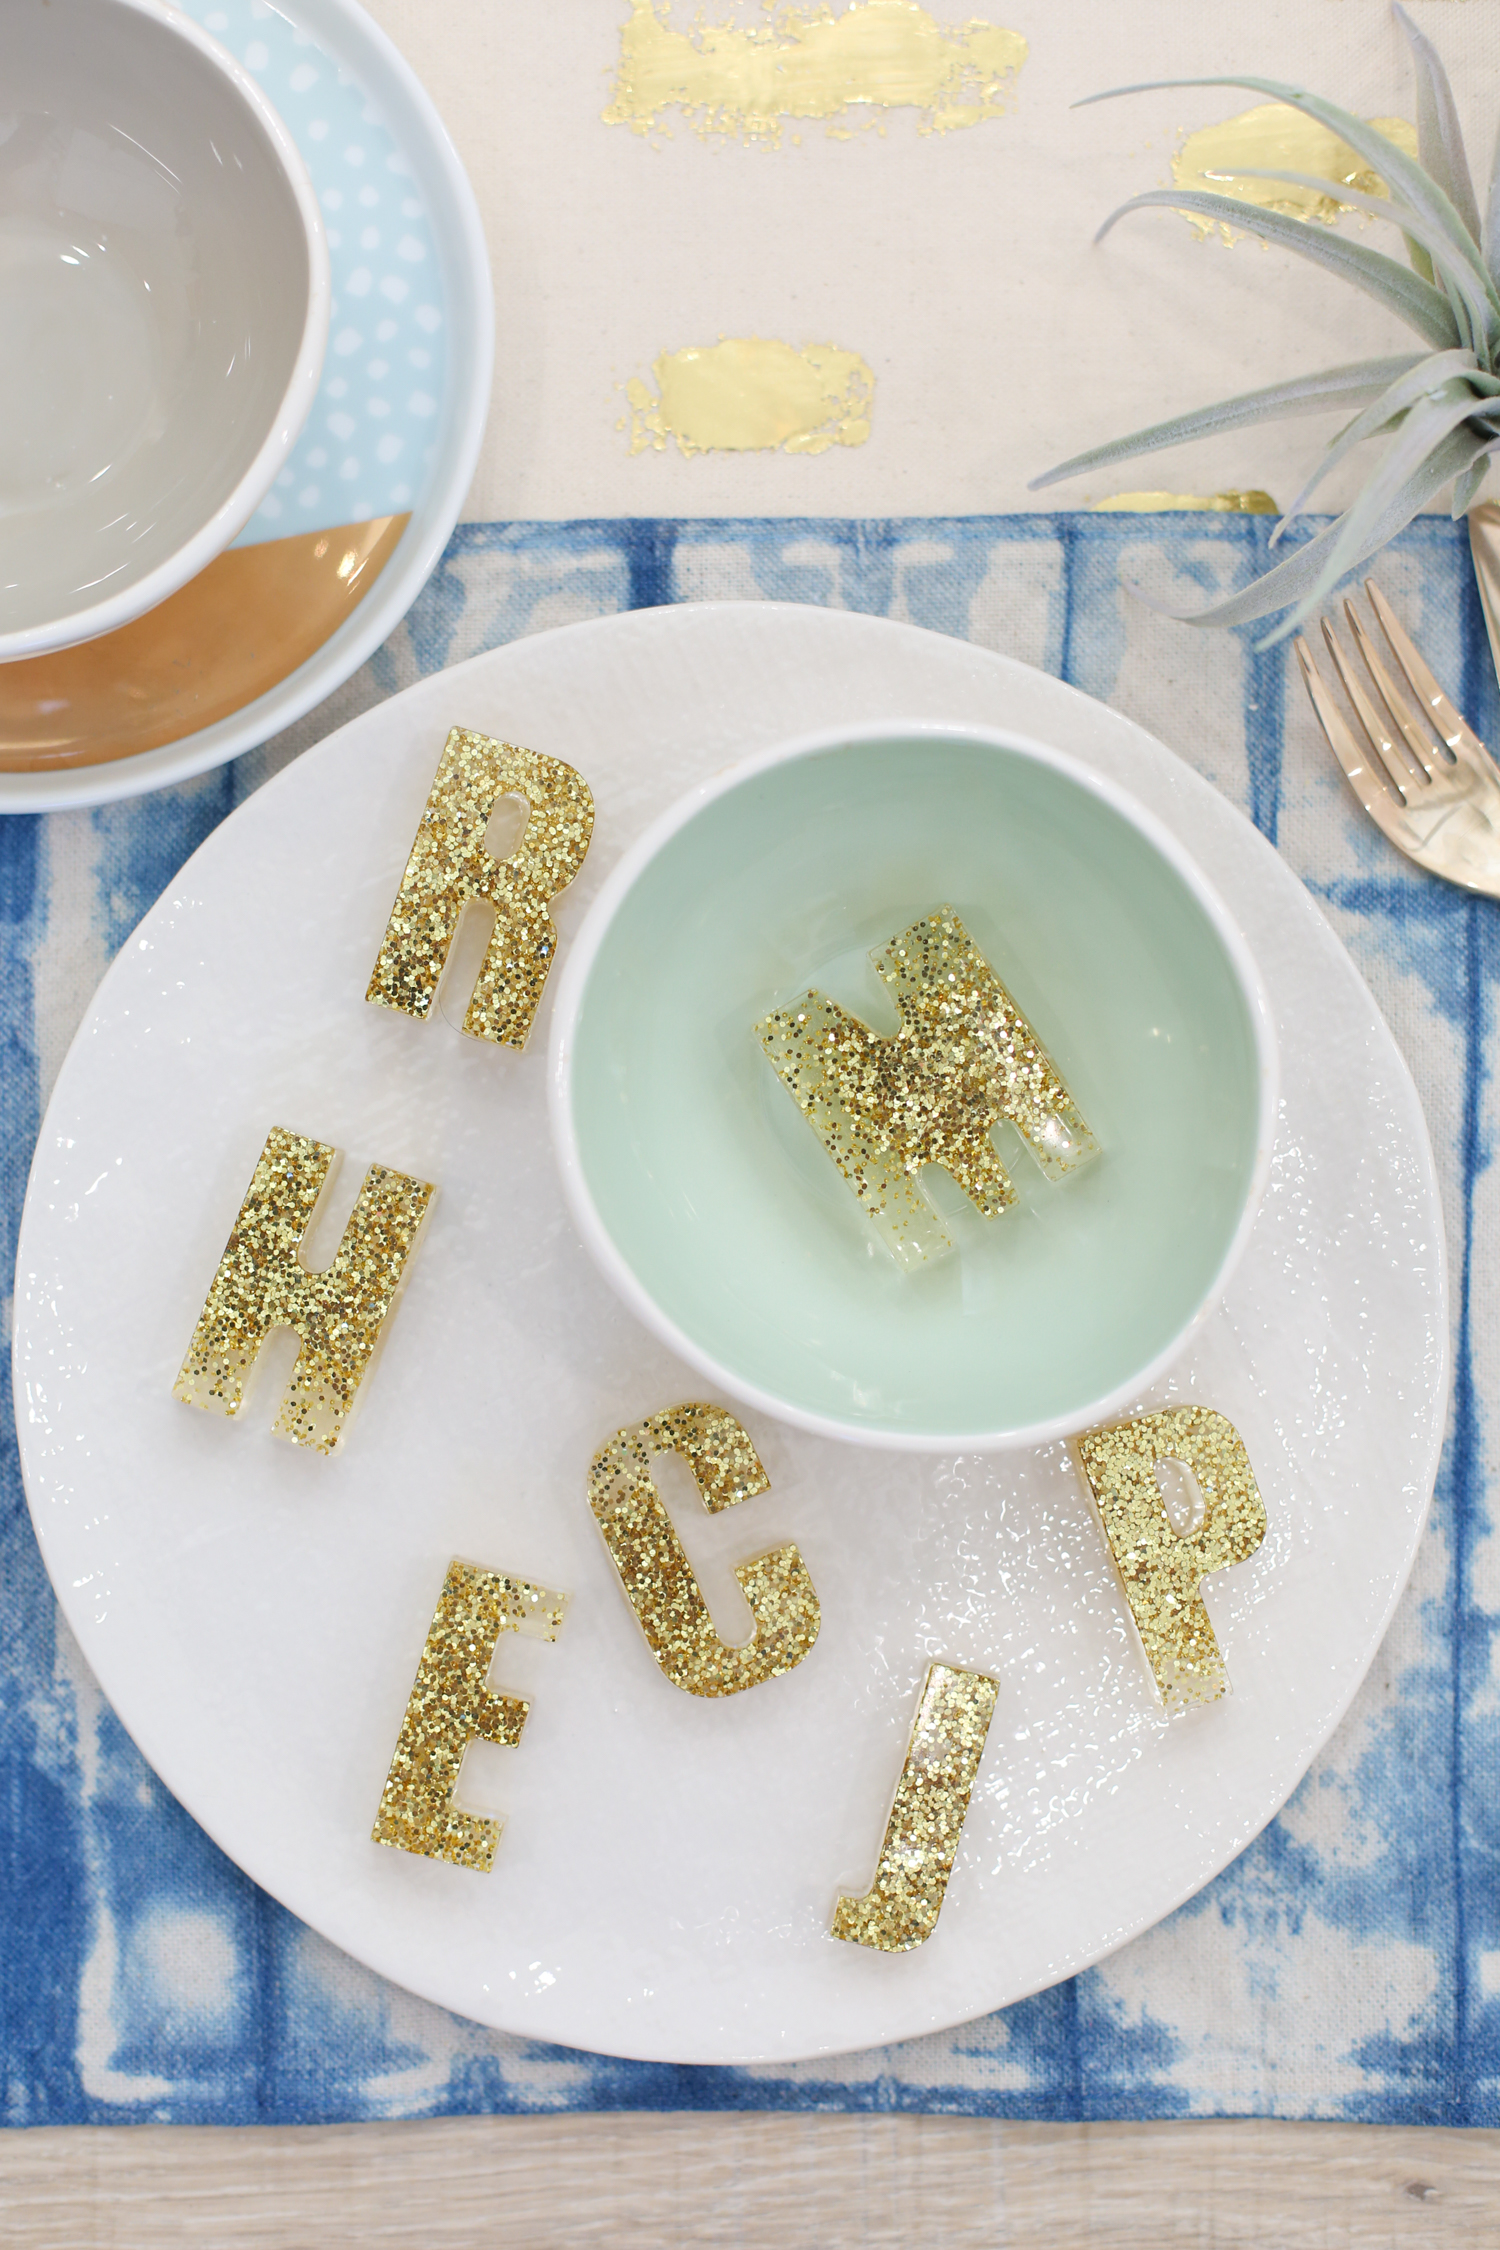 DIY resin and gold glitter monogram place cards